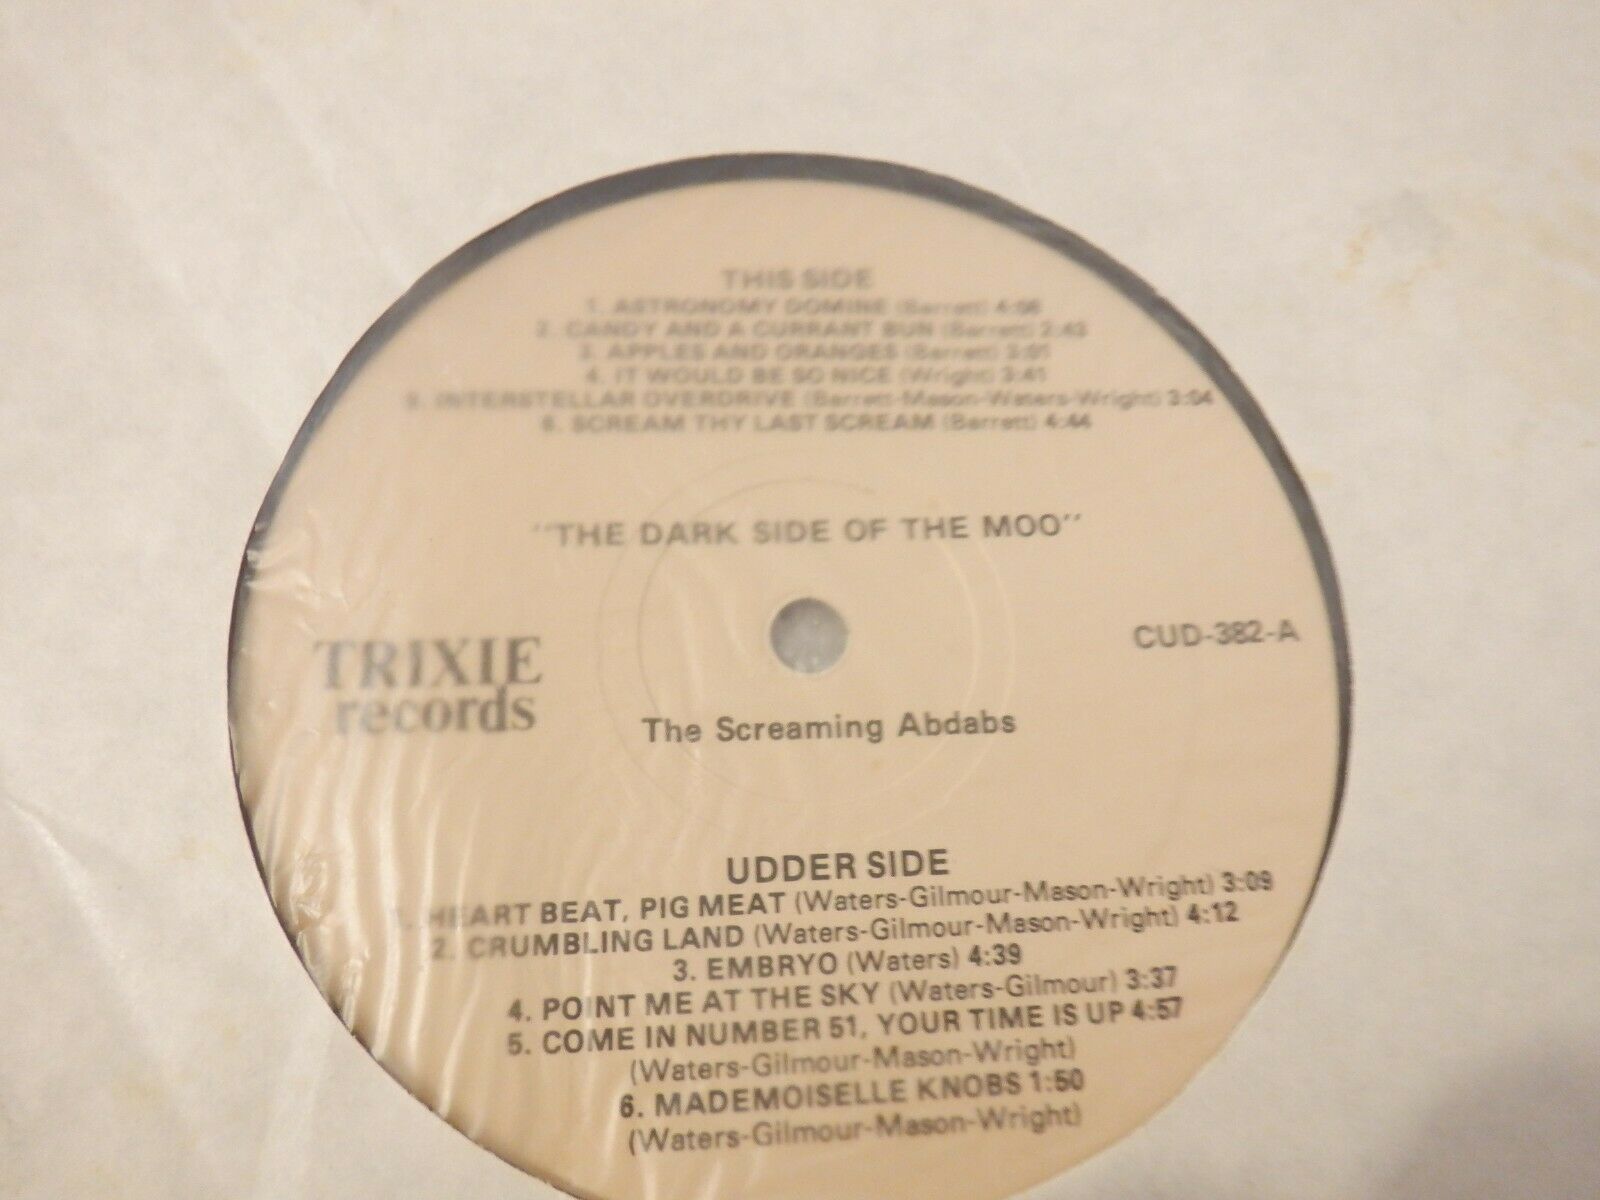 Pic 2 The Dark Side Of The Moo; Pink Floyd 1986 Vinyl Trixie Records; Screaming Abdabs